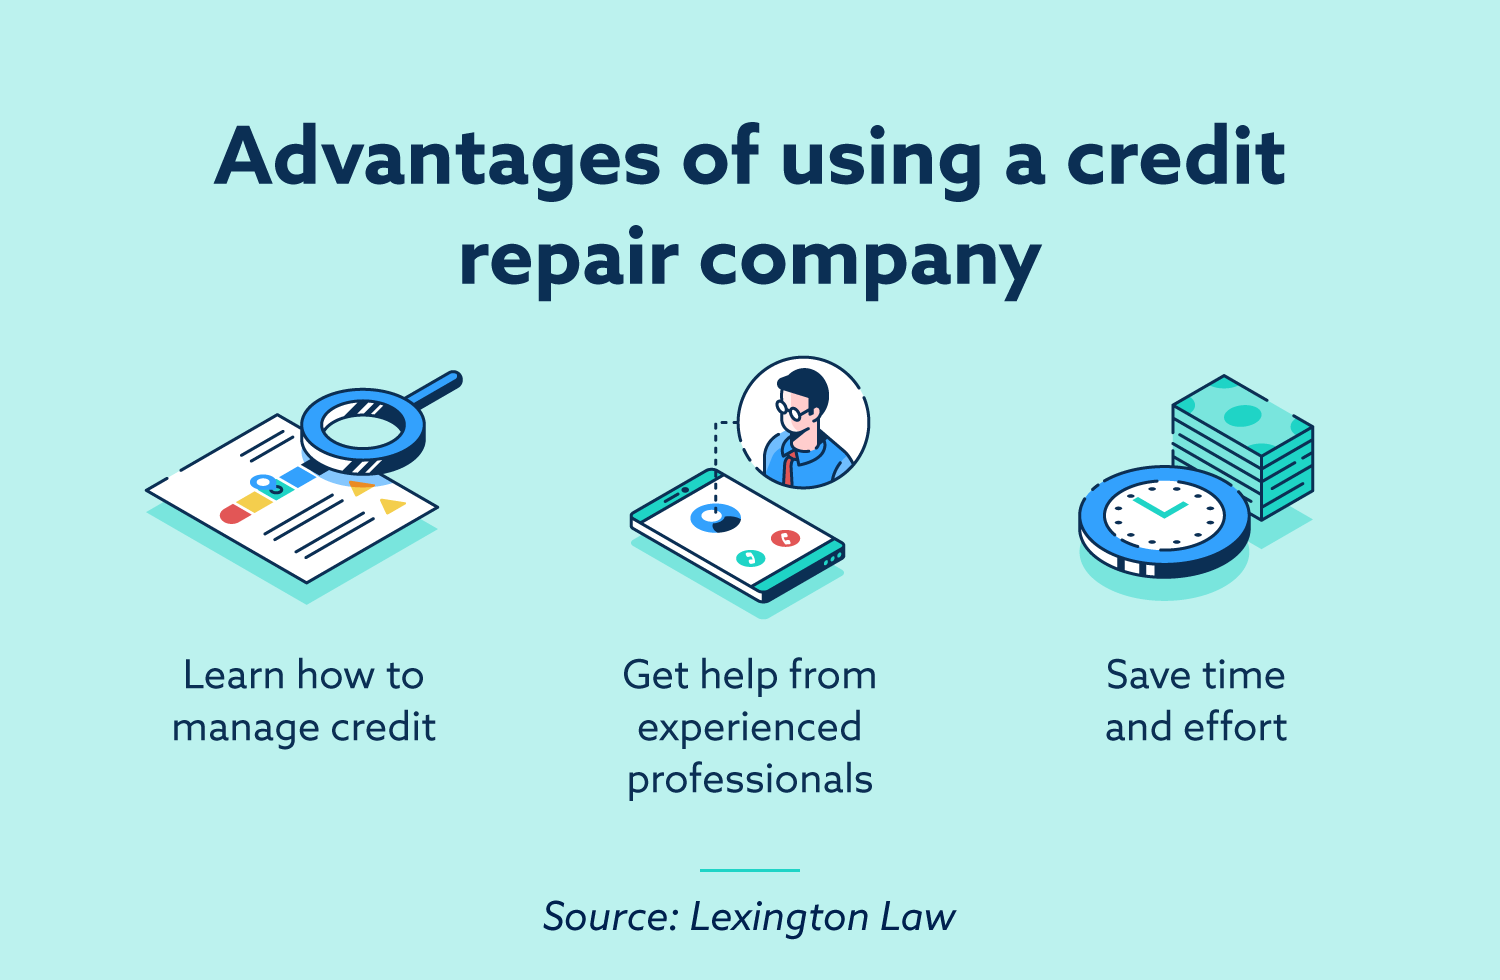 How Does A Credit Repair Company Work?